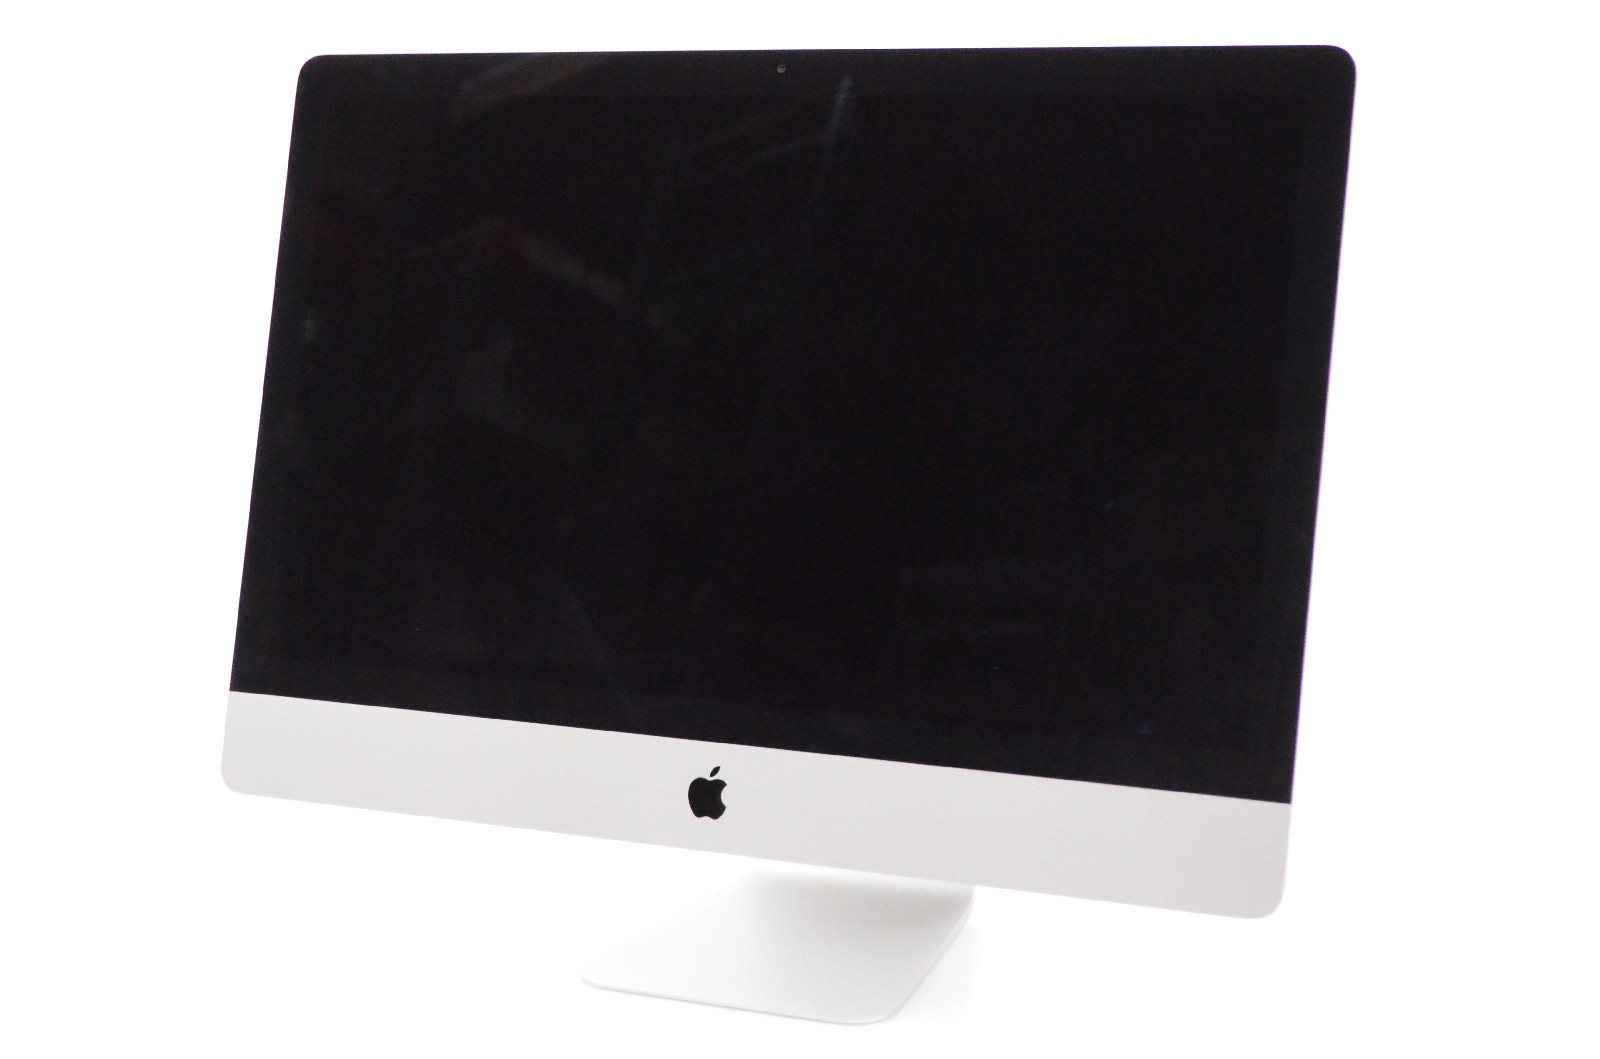 APPLE-IMAC-A1419-DT-I7-1TB-Apple iMac A1419 Retina 5k Refurbished Display (Late 2014) 8GB RAM 1TB HDD Core i7 27-inch Fully Activated OSX 10.10 -image